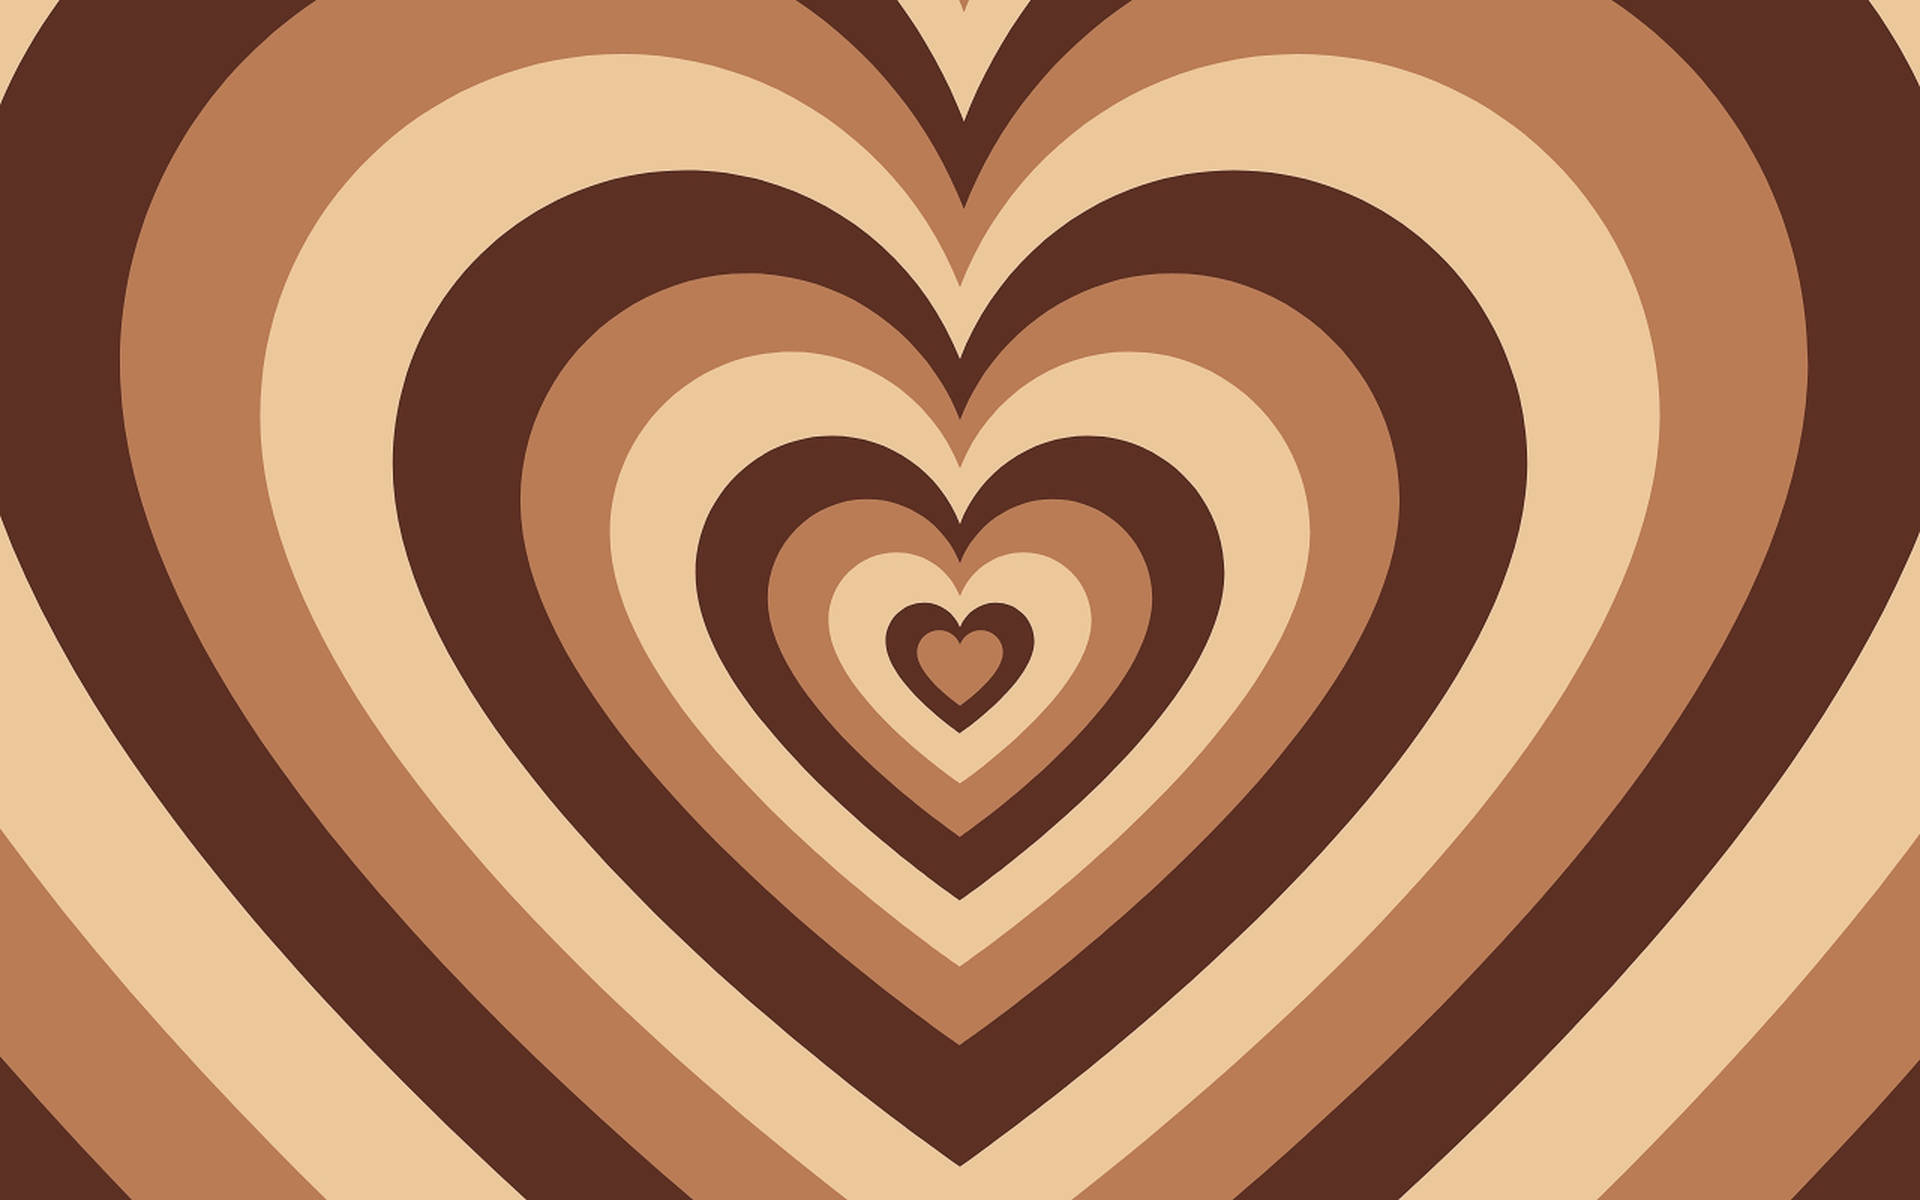 Free Hearts Wallpaper Downloads, [500+] Hearts Wallpapers for FREE |  